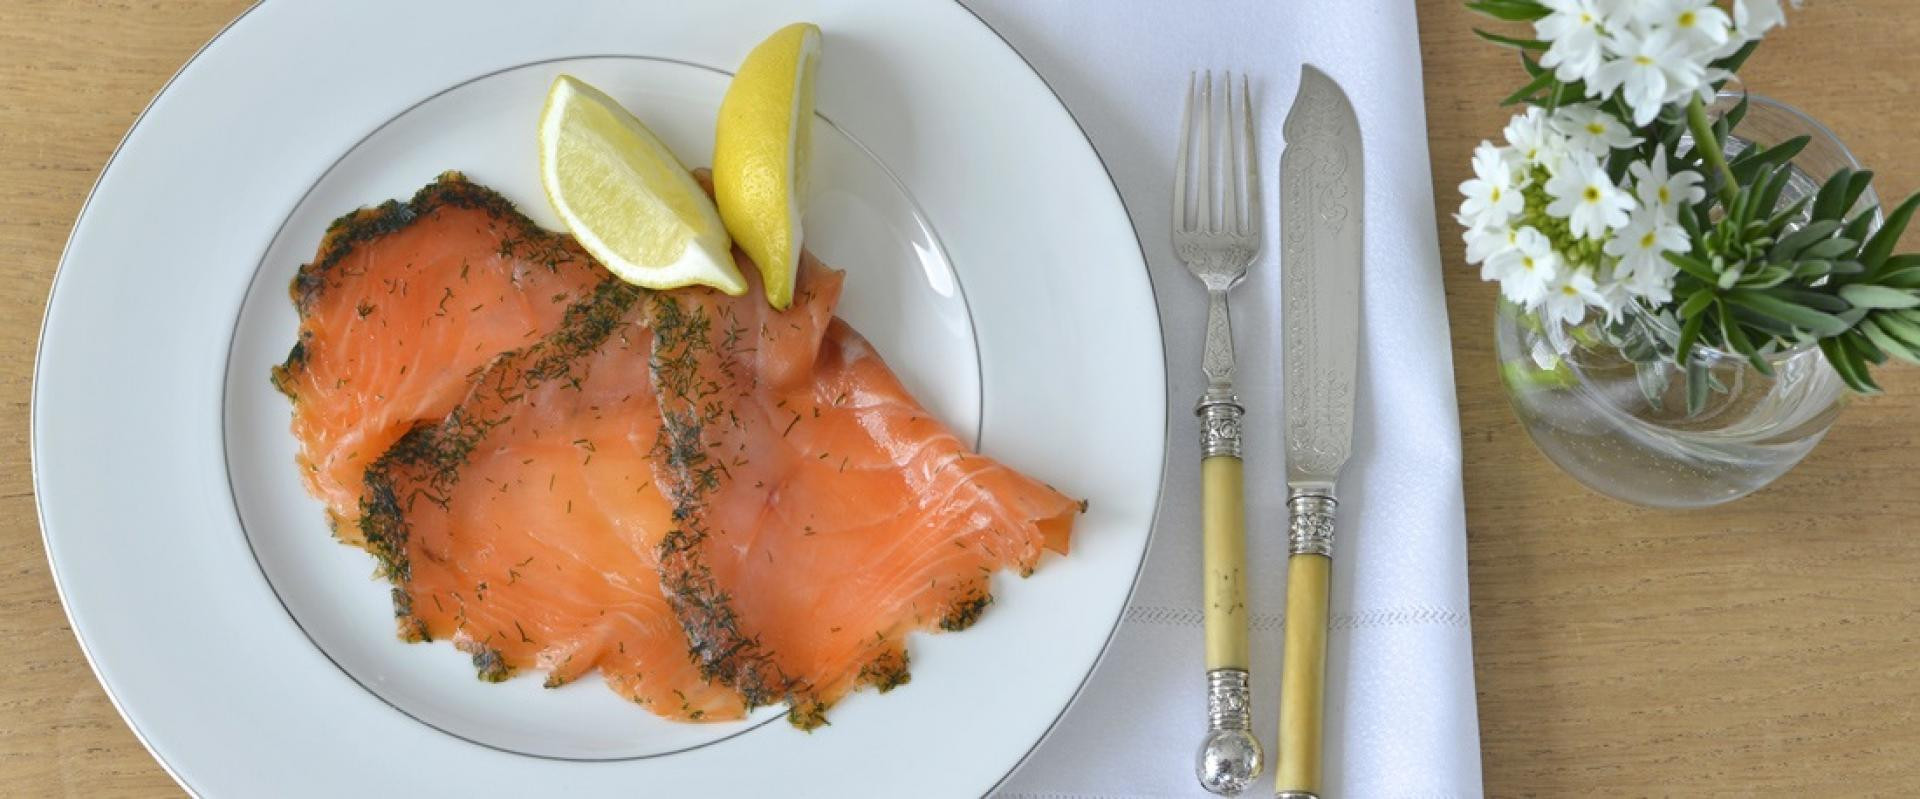 Smoked Salmon For Sale
 Best 25 Smoked Salmon for Sale Best Round Up Recipe